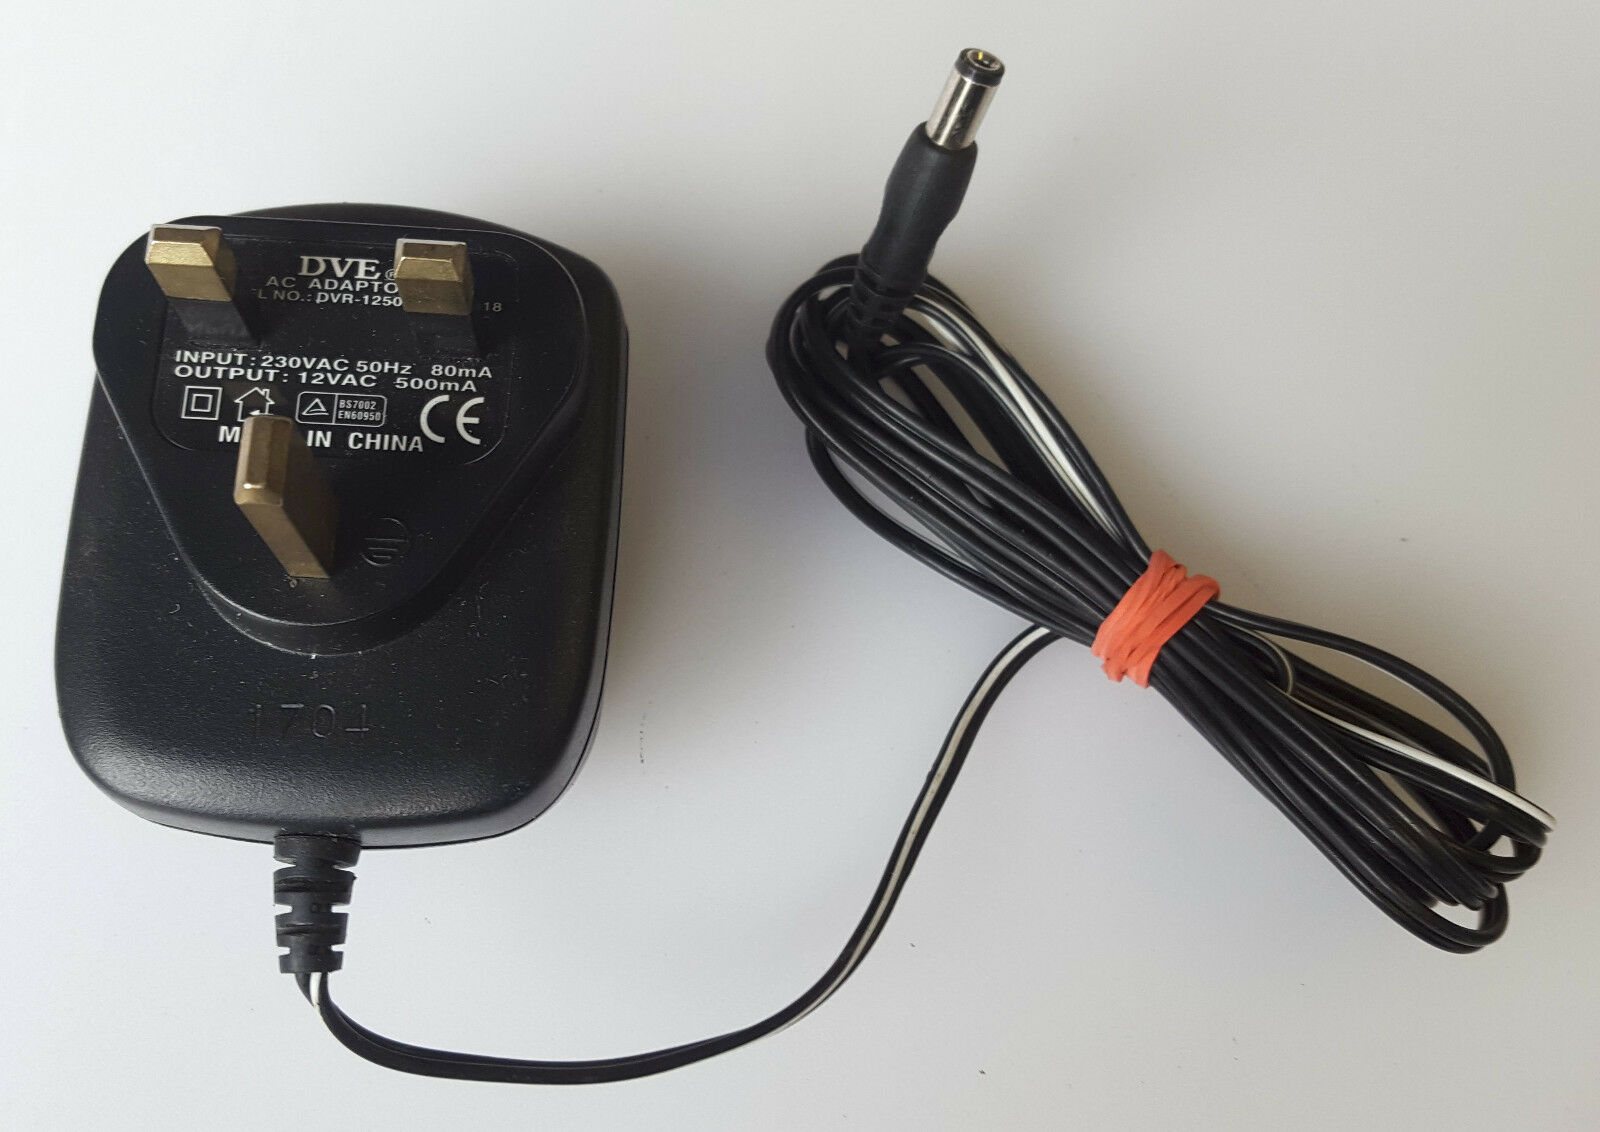 DVE DVR-1250ACUK-4818 AC/DC POWER SUPPLY ADAPTER 12V 0.5A UK PLUG Country/Region of Manufacture: China Brand: DVE Co